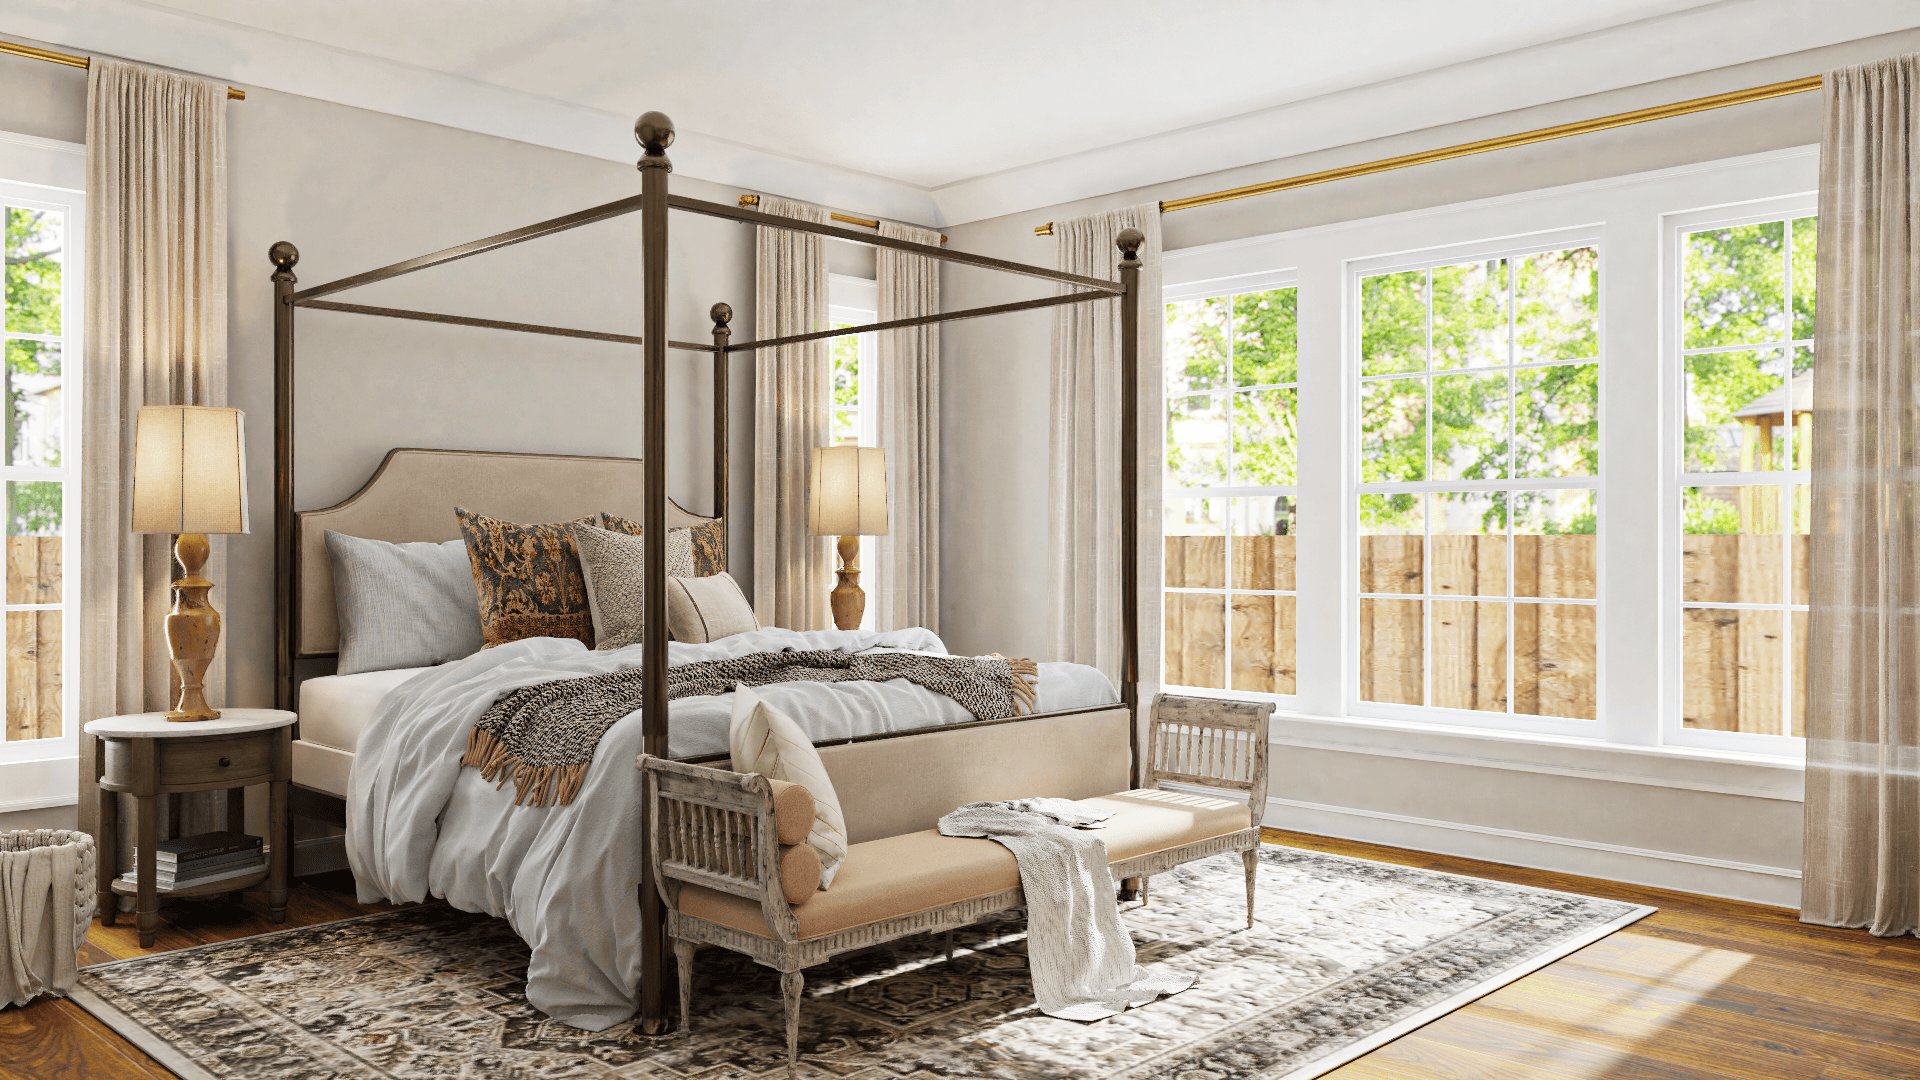 A French Country Bedroom Fit For A King & Queen